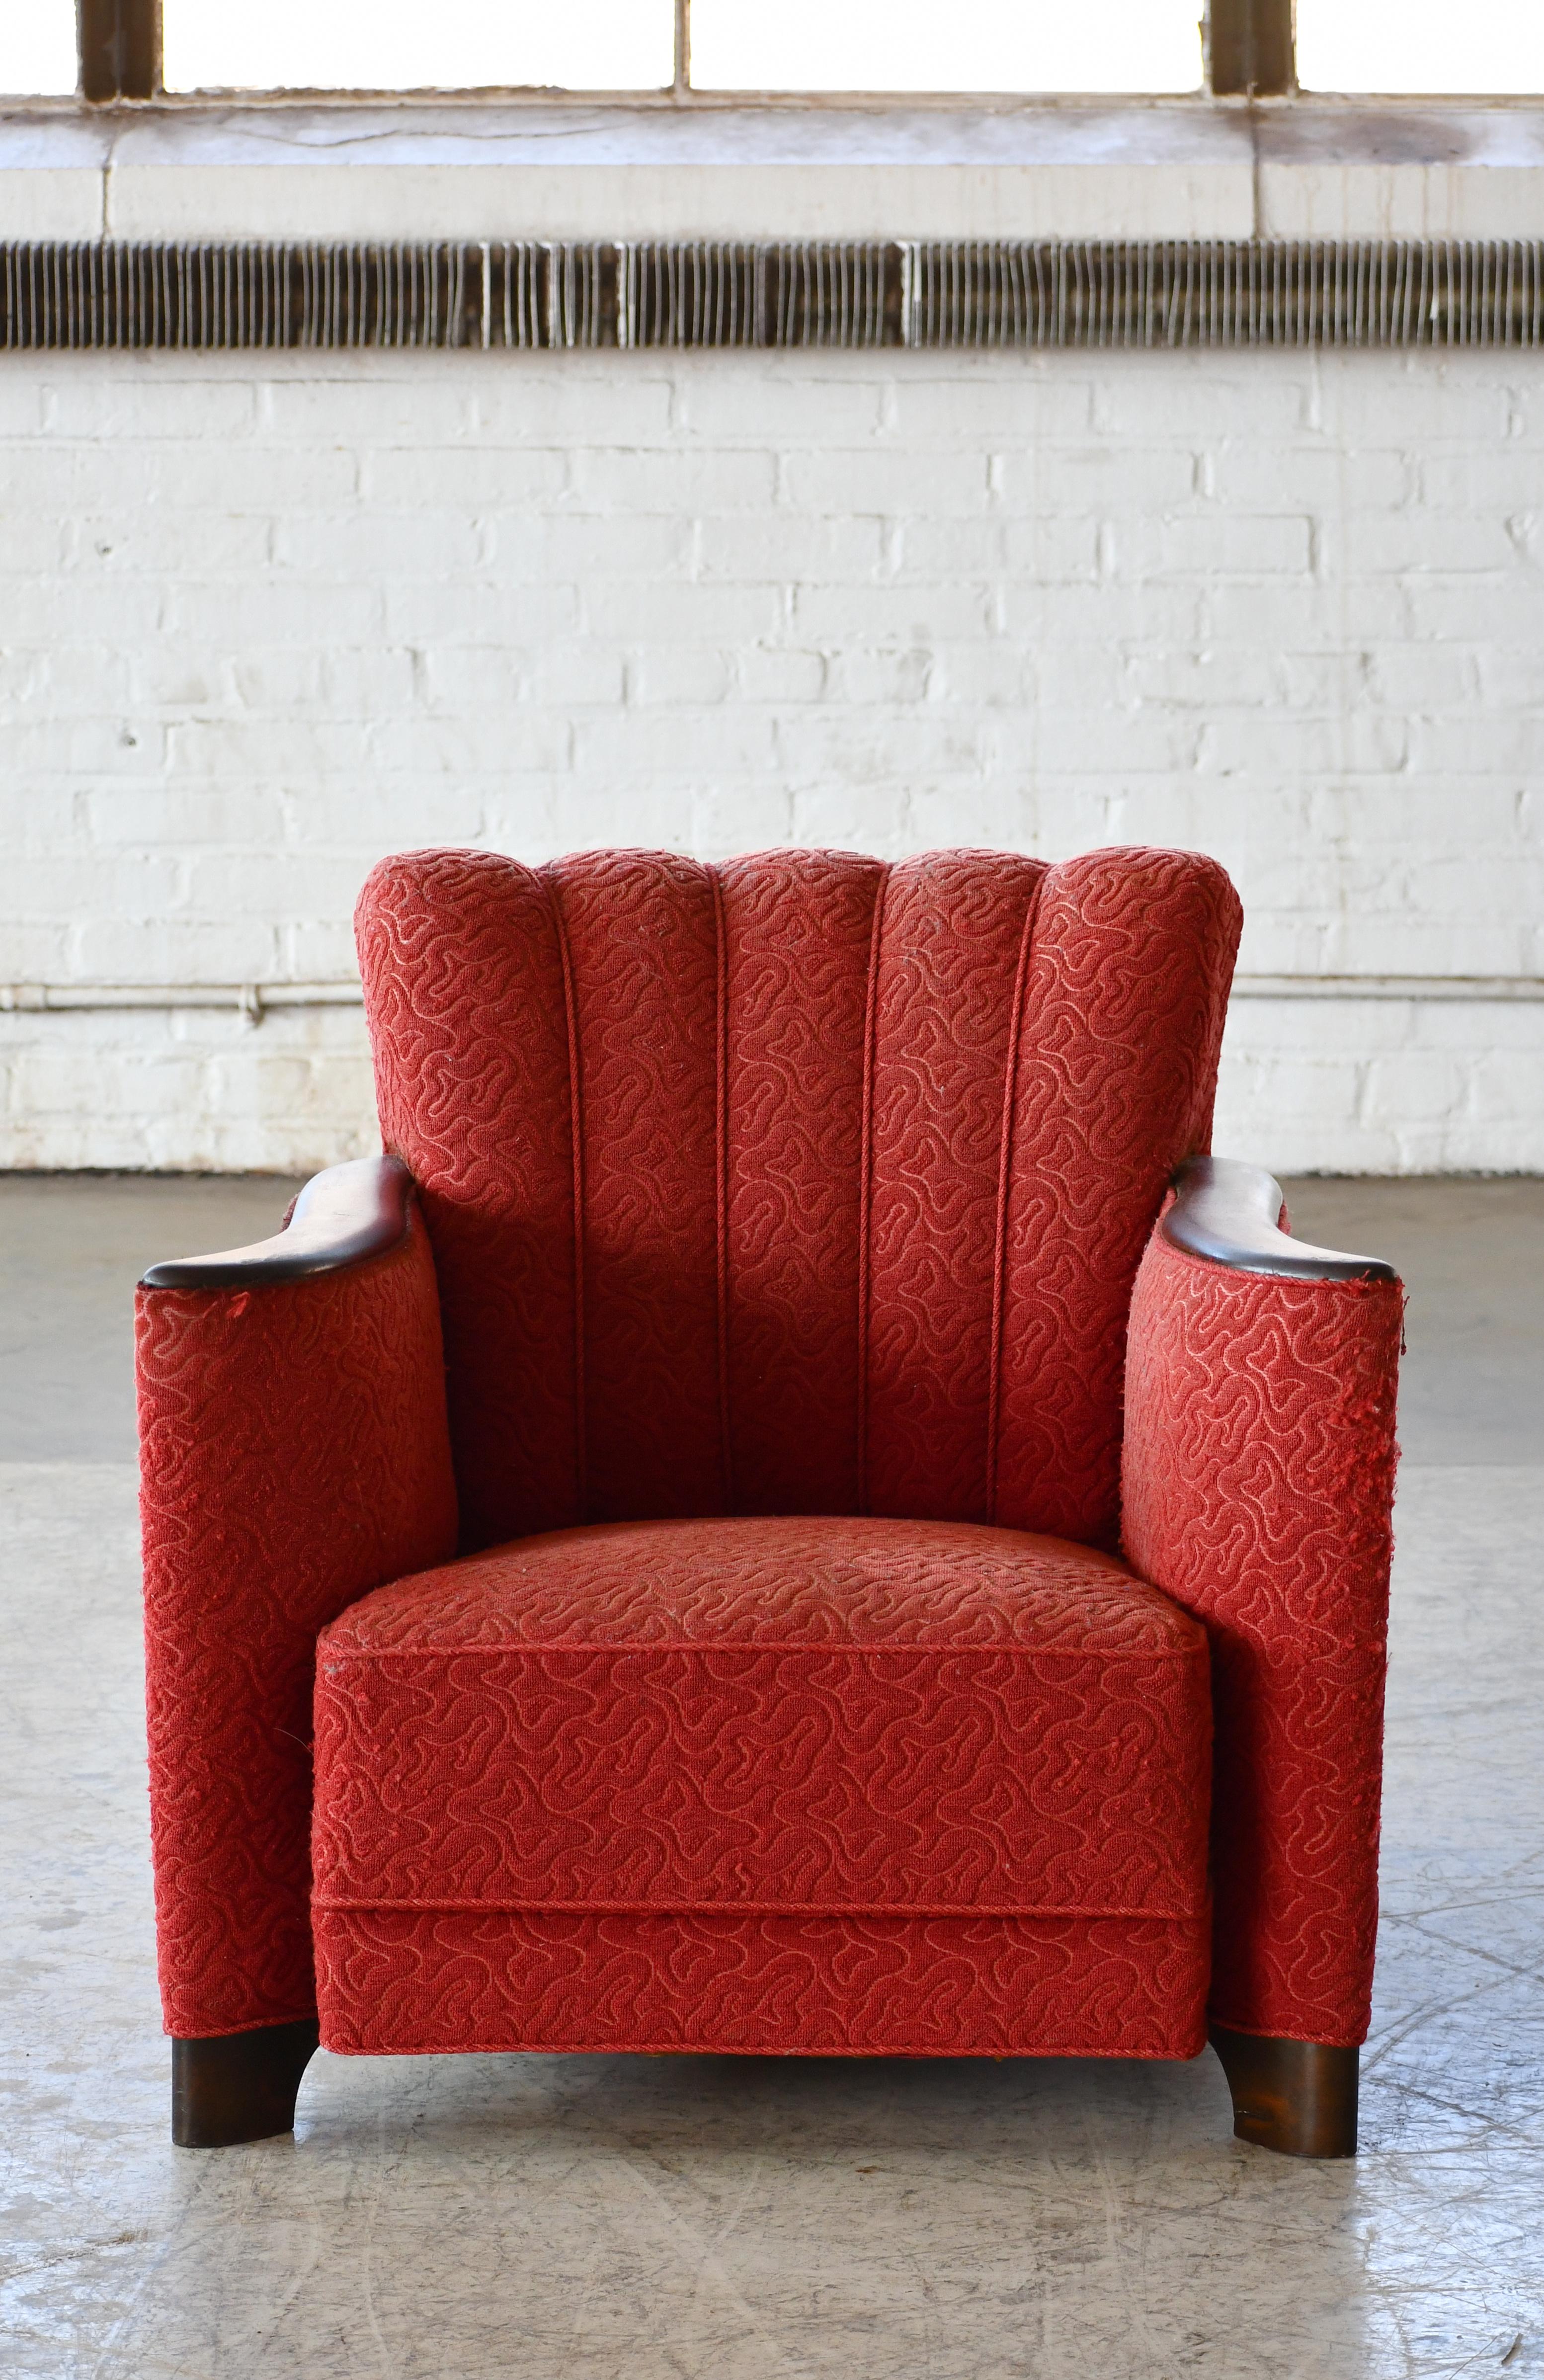 Danish 1930s Art Deco Lounge Chair in Red Mohair with Mahogany Accents In Good Condition For Sale In Bridgeport, CT